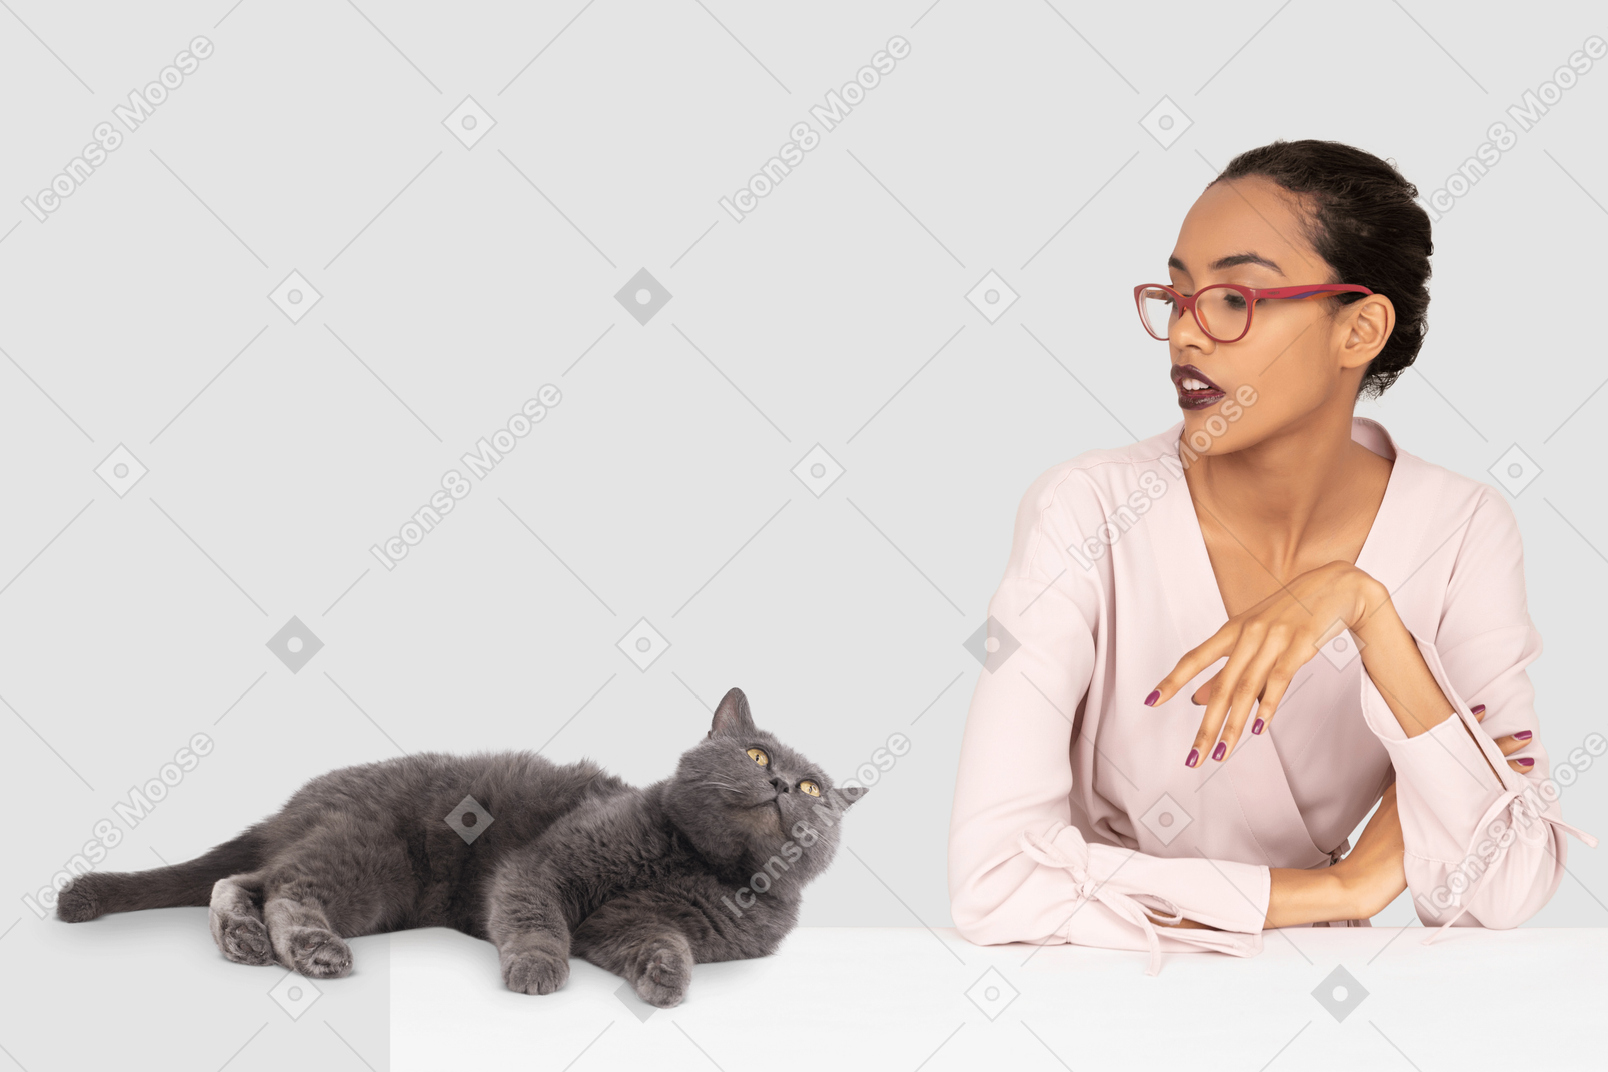 A woman in a pink shirt and a gray cat